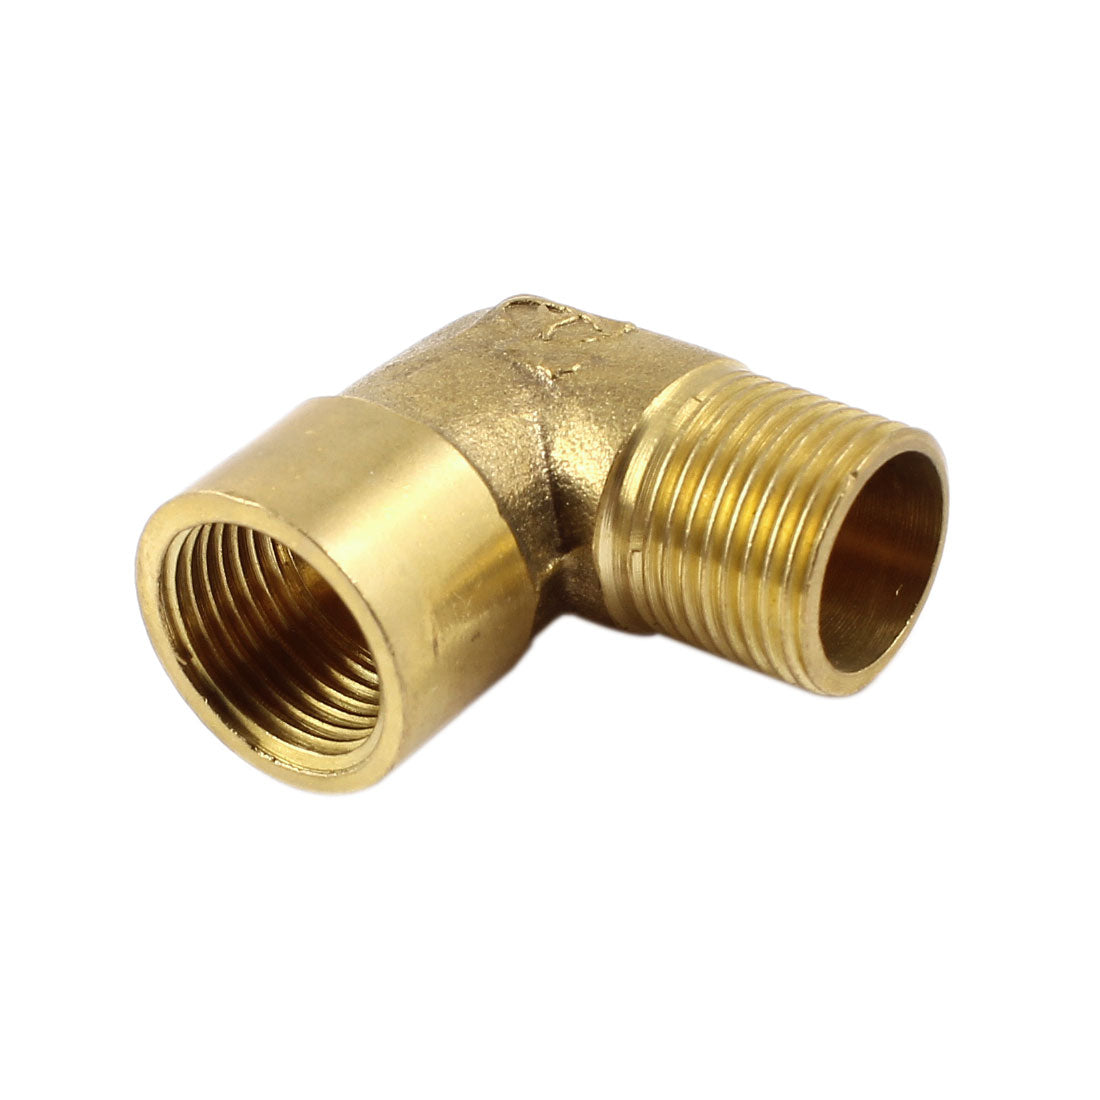 uxcell Uxcell Brass Tone 90 Degree Elbow 3/8 PT Male to 3/8 PT Female Pipe Fitting Coupler